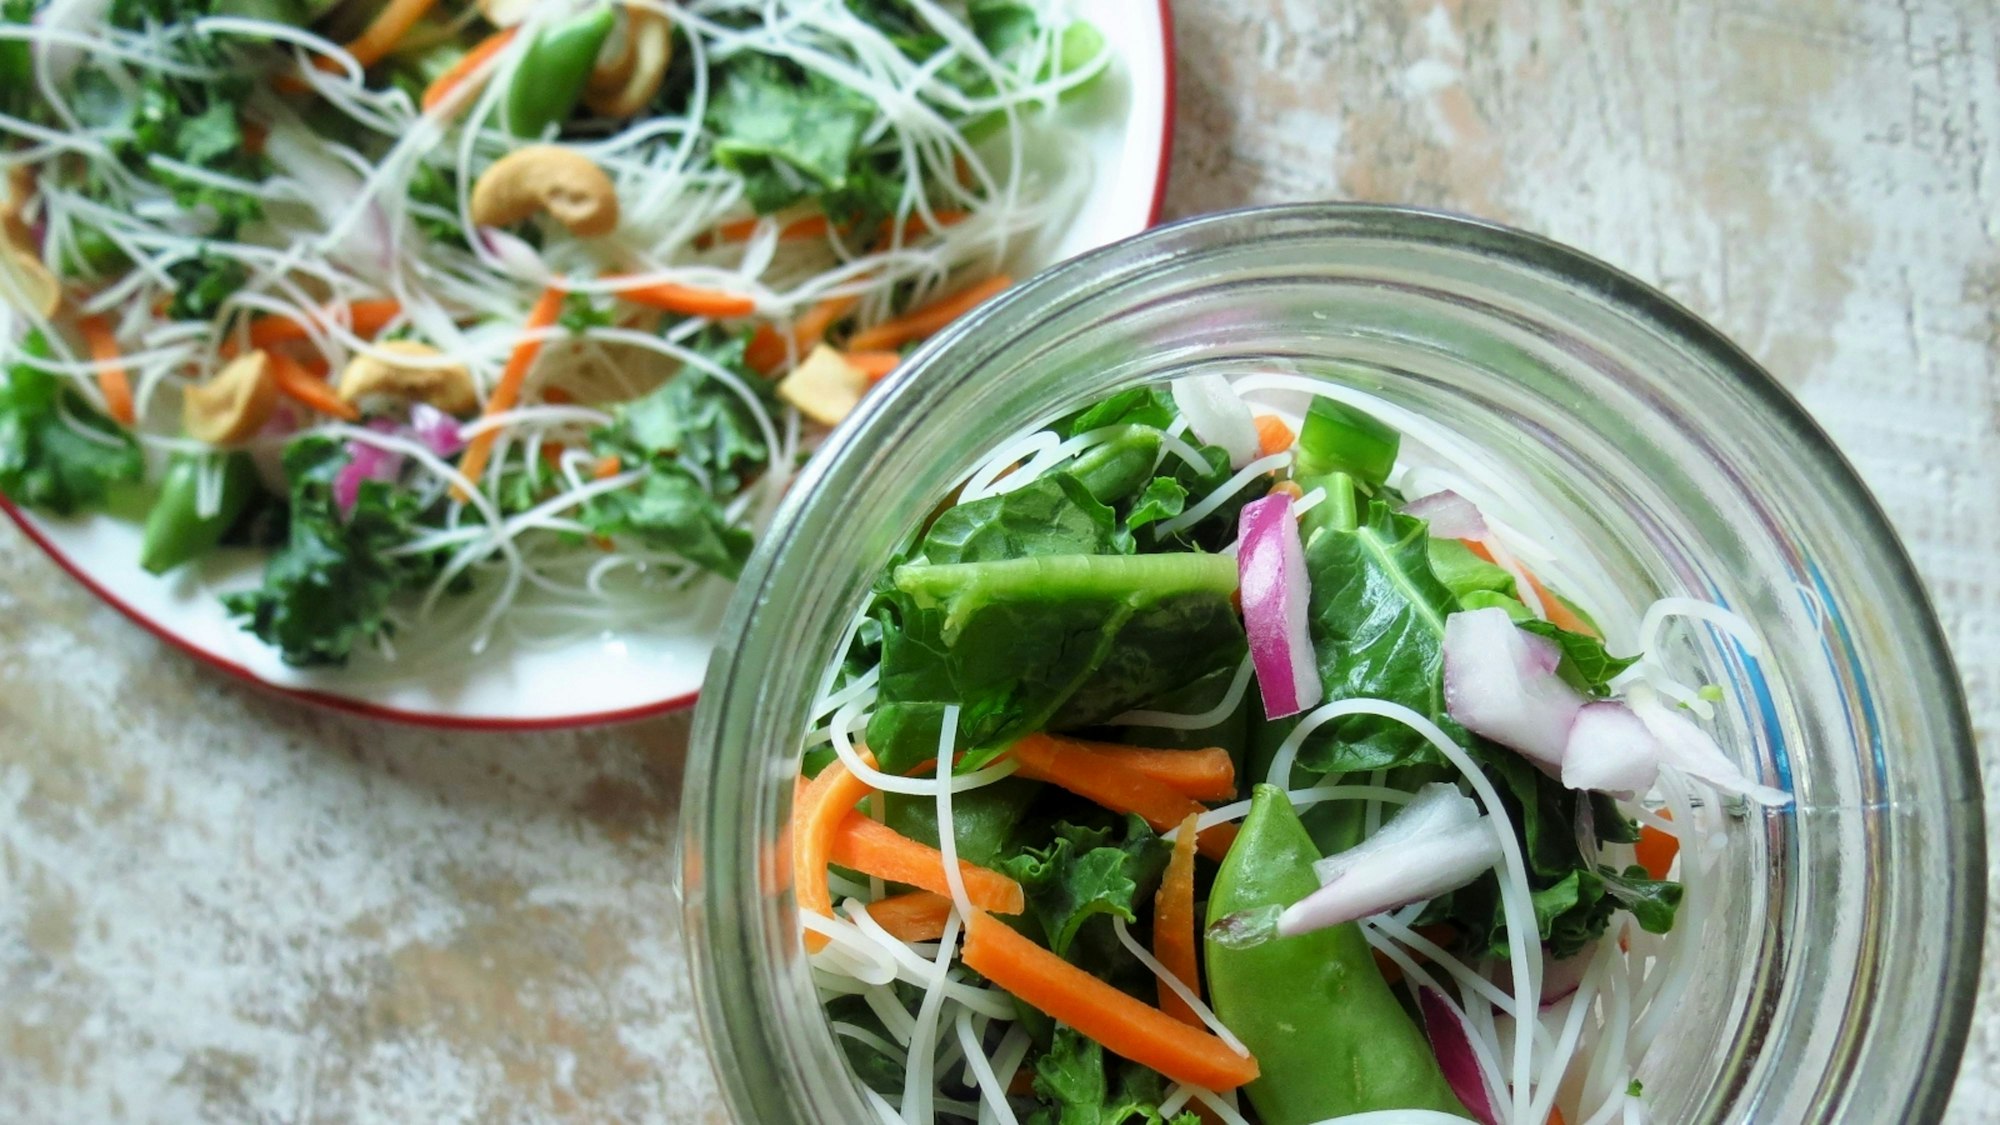 Noodle, veggie and green salad in a mason jar and on a plate. Toss in a smidgen of your favorite teriyaki sauce.